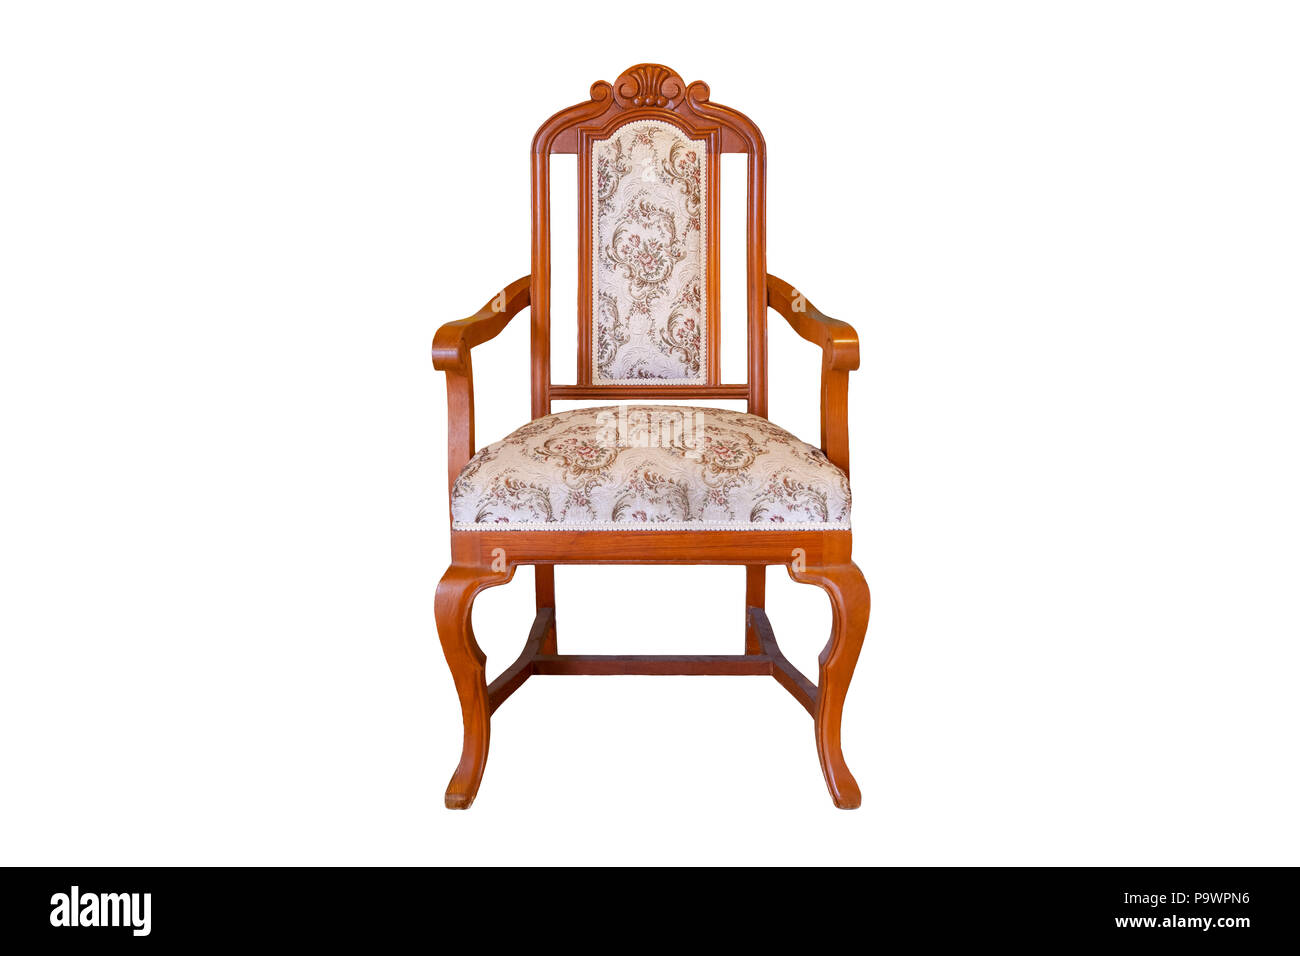 Luxury  Vintage chair isolate on White Background Stock Photo